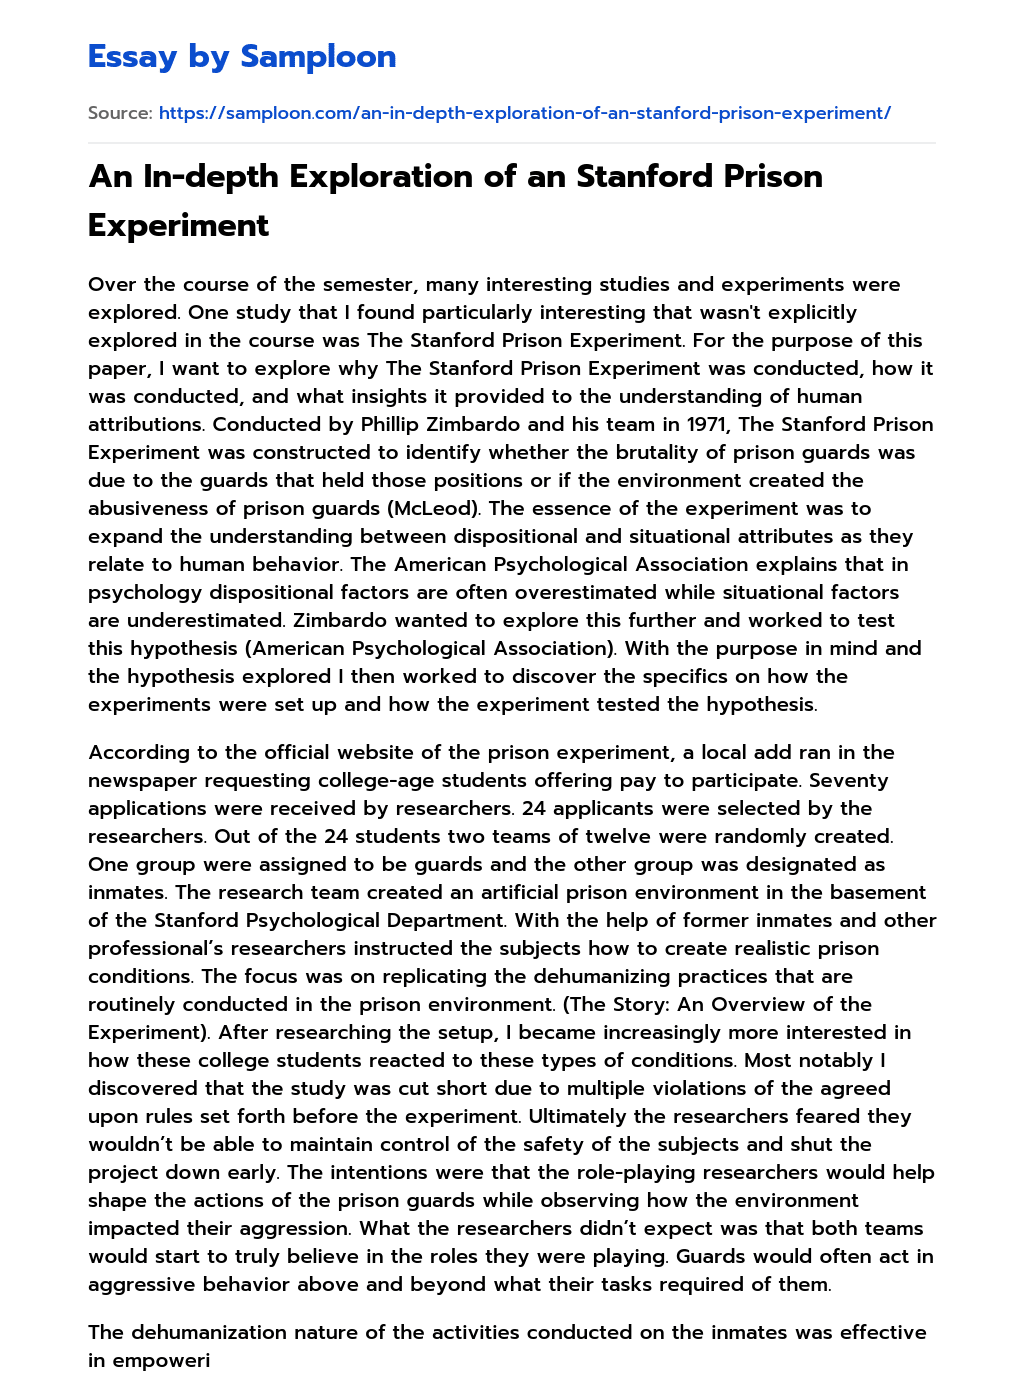 An In-depth Exploration of an Stanford Prison Experiment essay